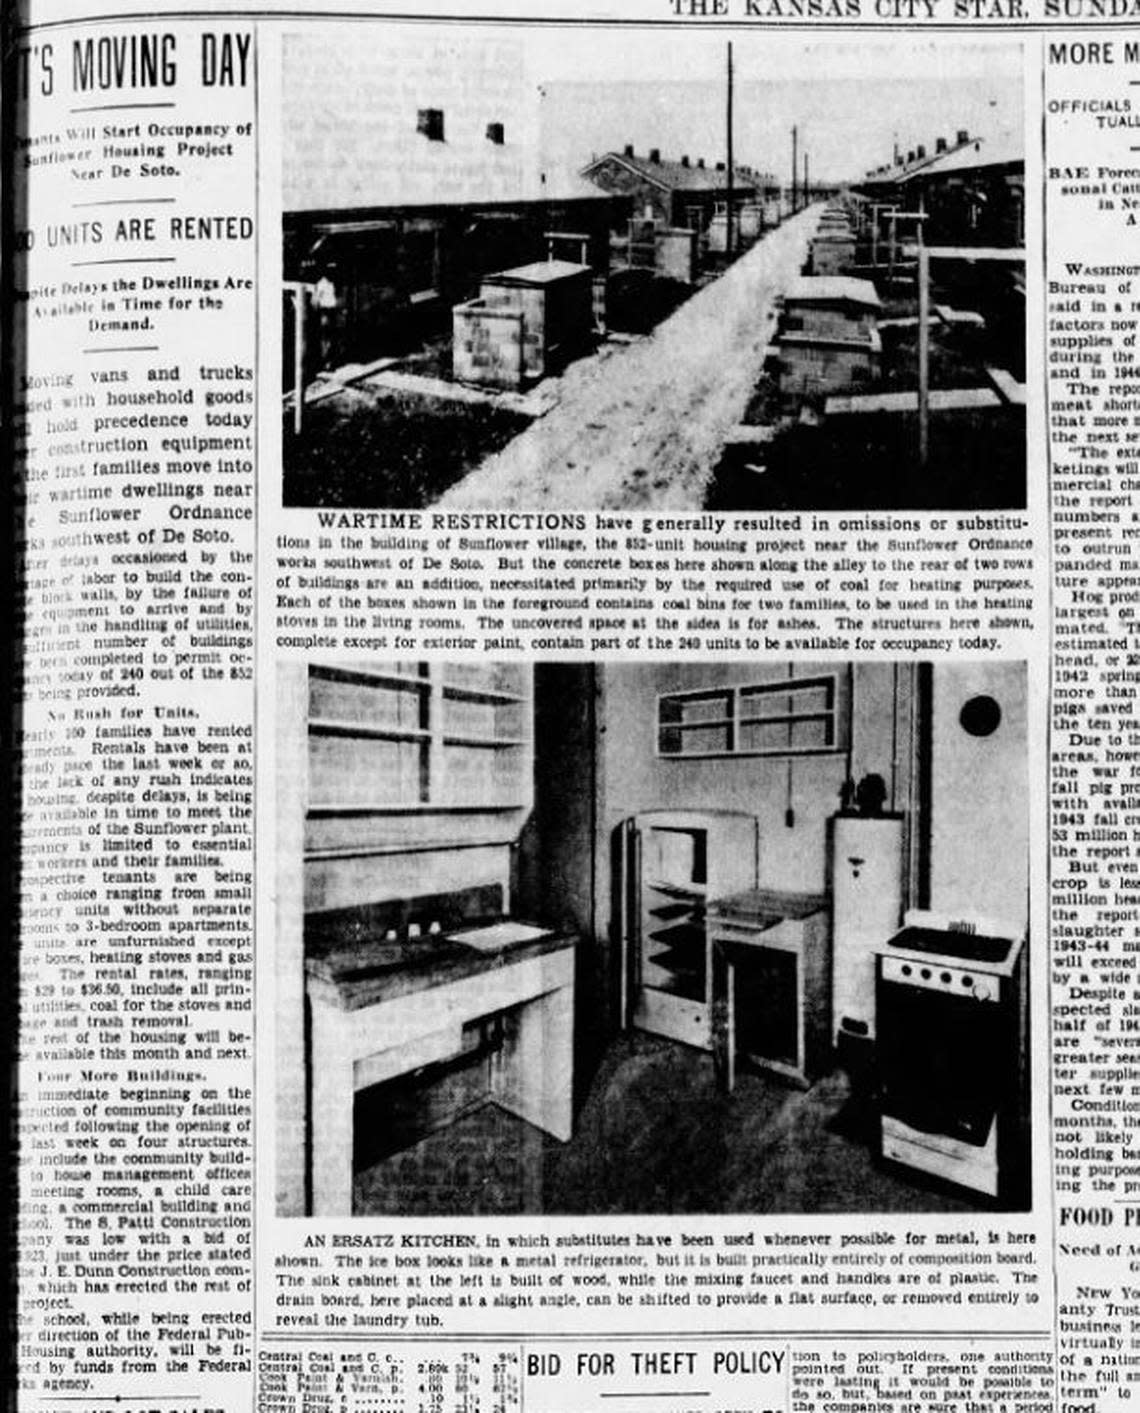 A story in The Kansas City Star on Aug. 1 1943, “It’s Moving Day,” announced the first tenants to arrive at Sunflower Village for the employees and their families at the Sunflower Ordnance Works.